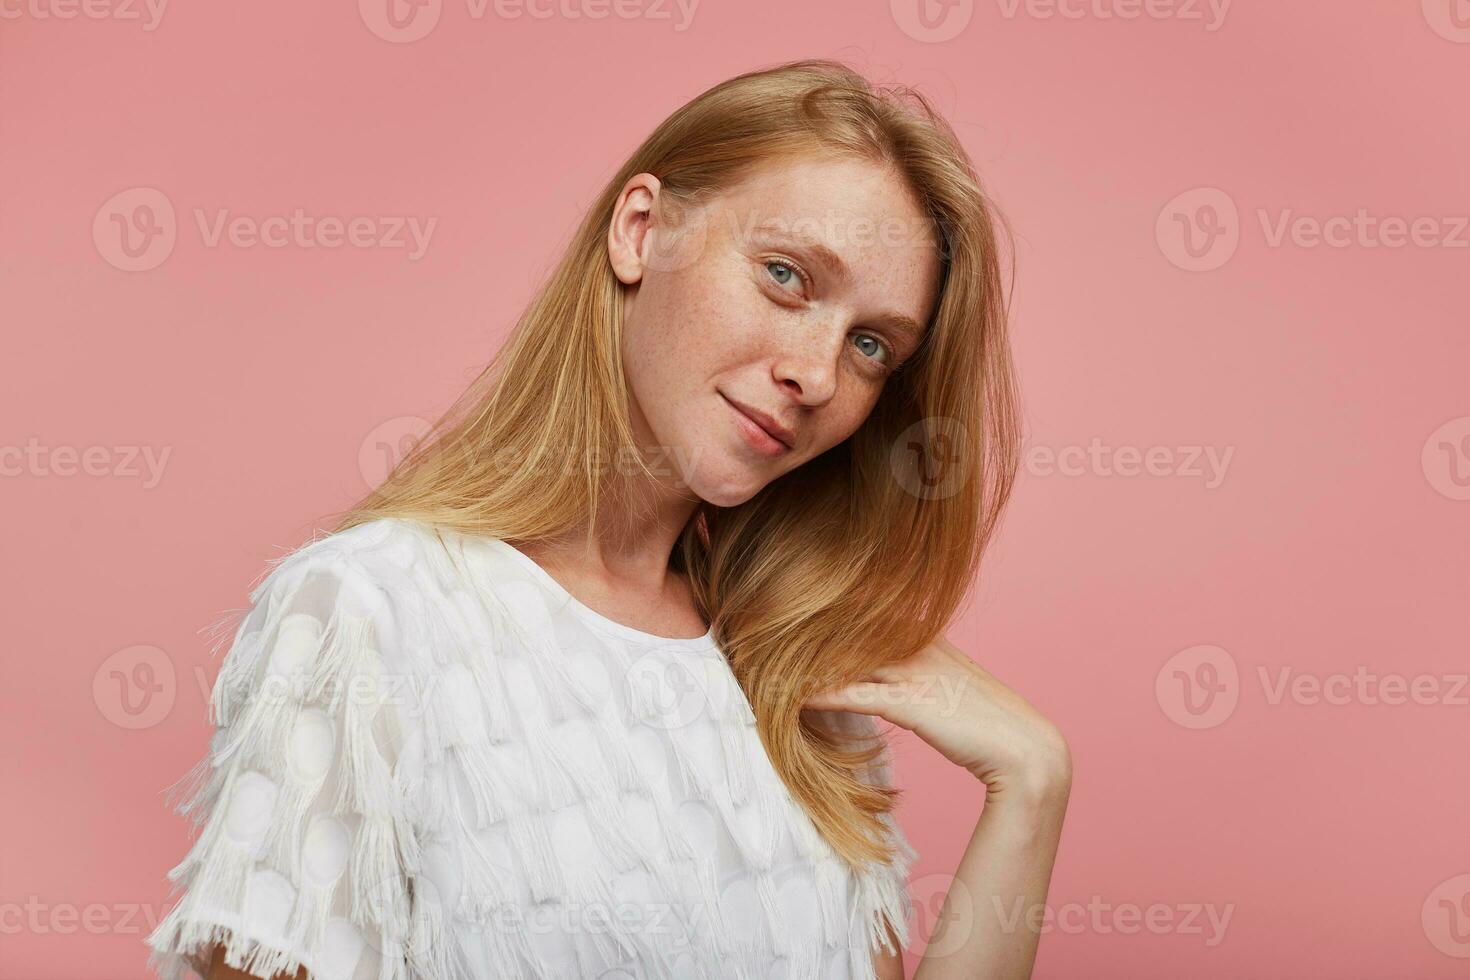 Indoor photo of charming young redhead woman with natural makeup dressed in elegant wear looking positively at camera and smiling gently, isolated over pink background